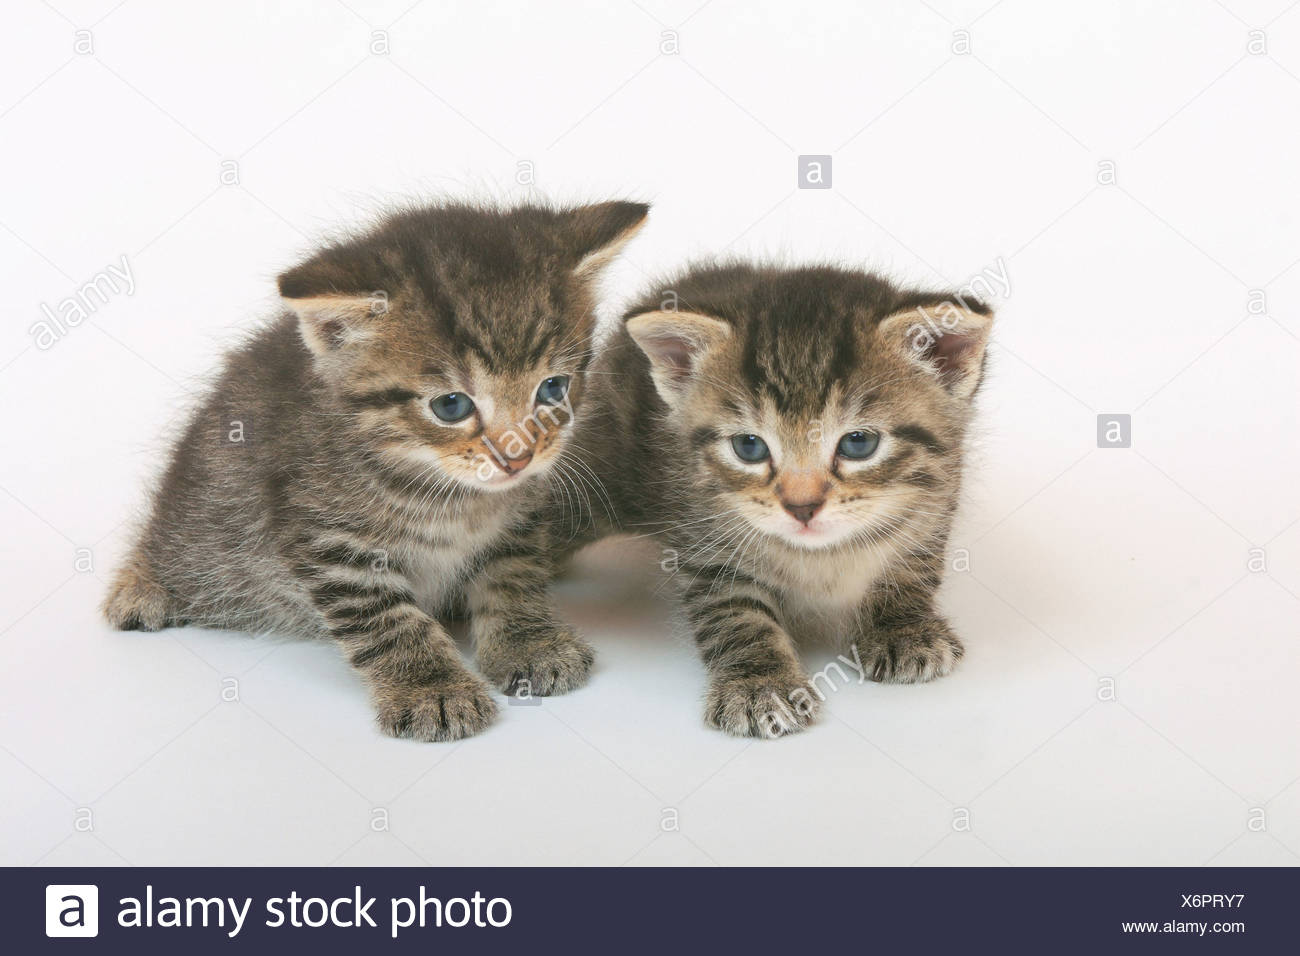 cute house cats